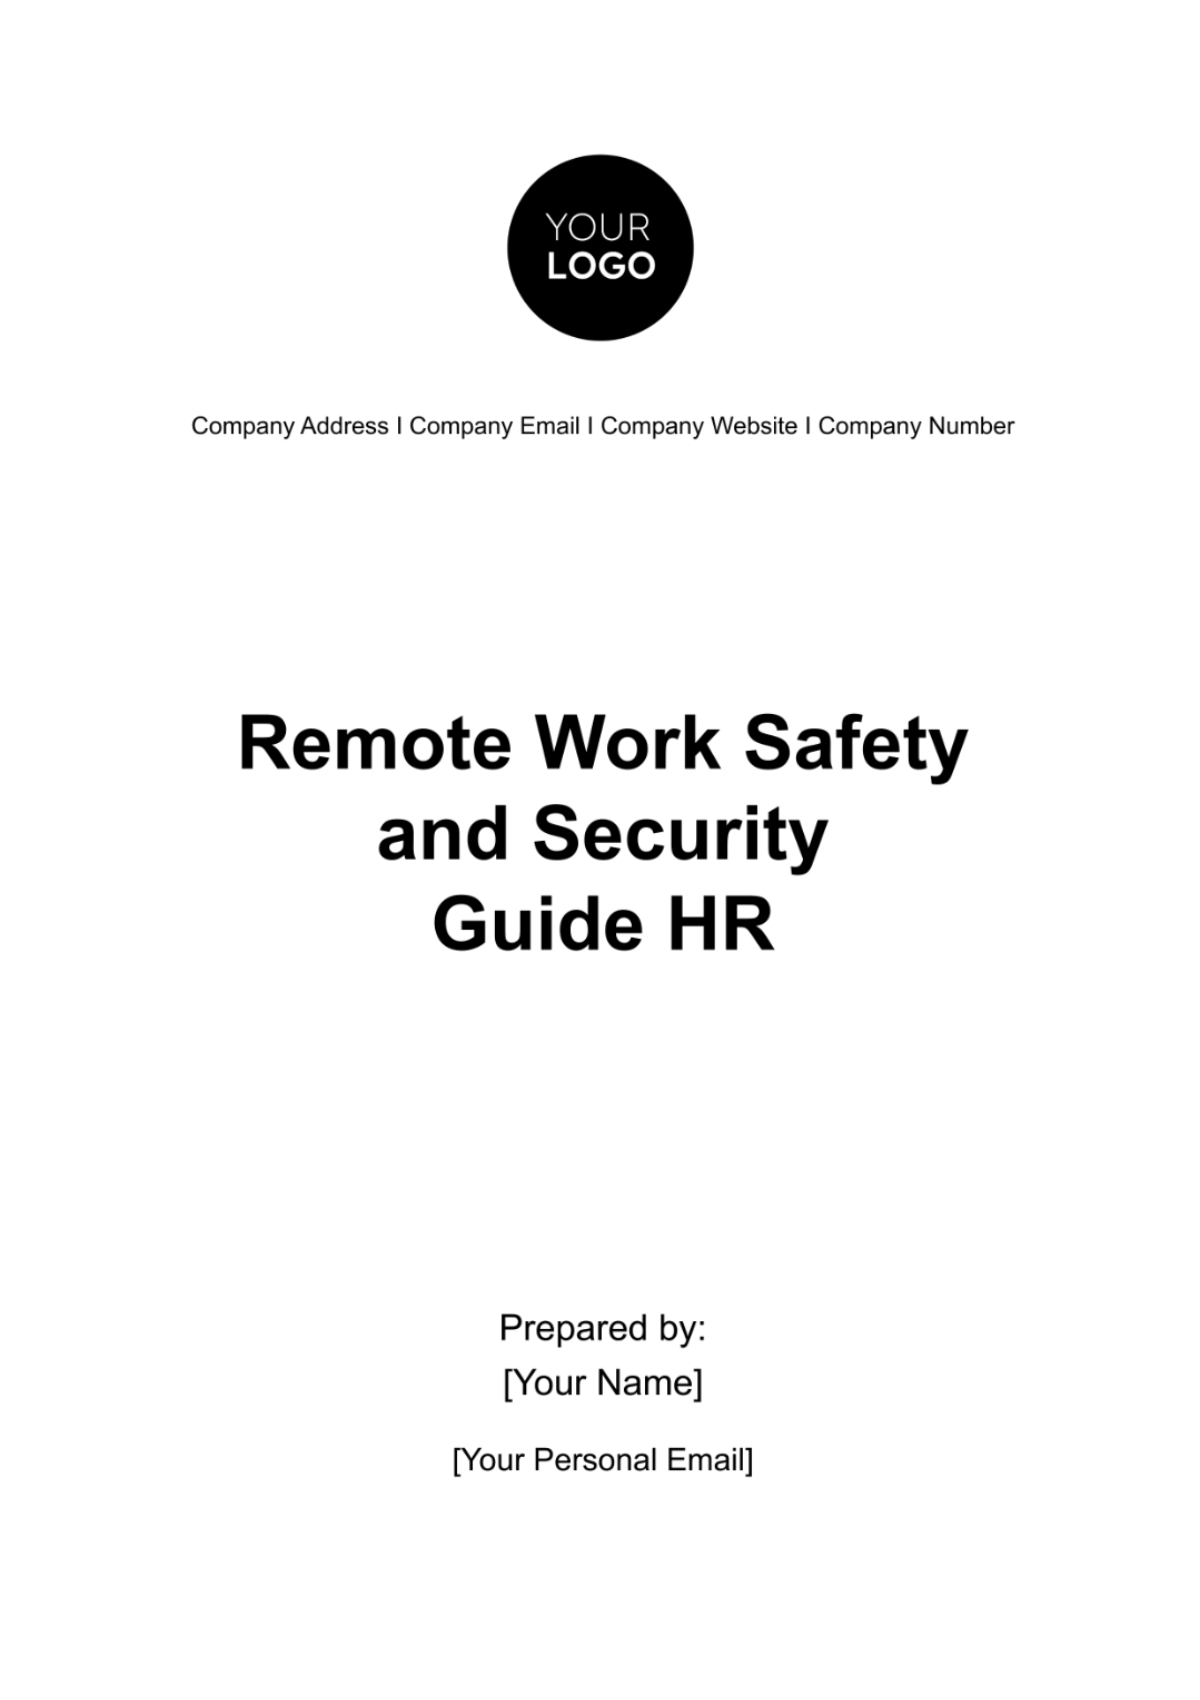 Remote Work Safety and Security Guide HR Template